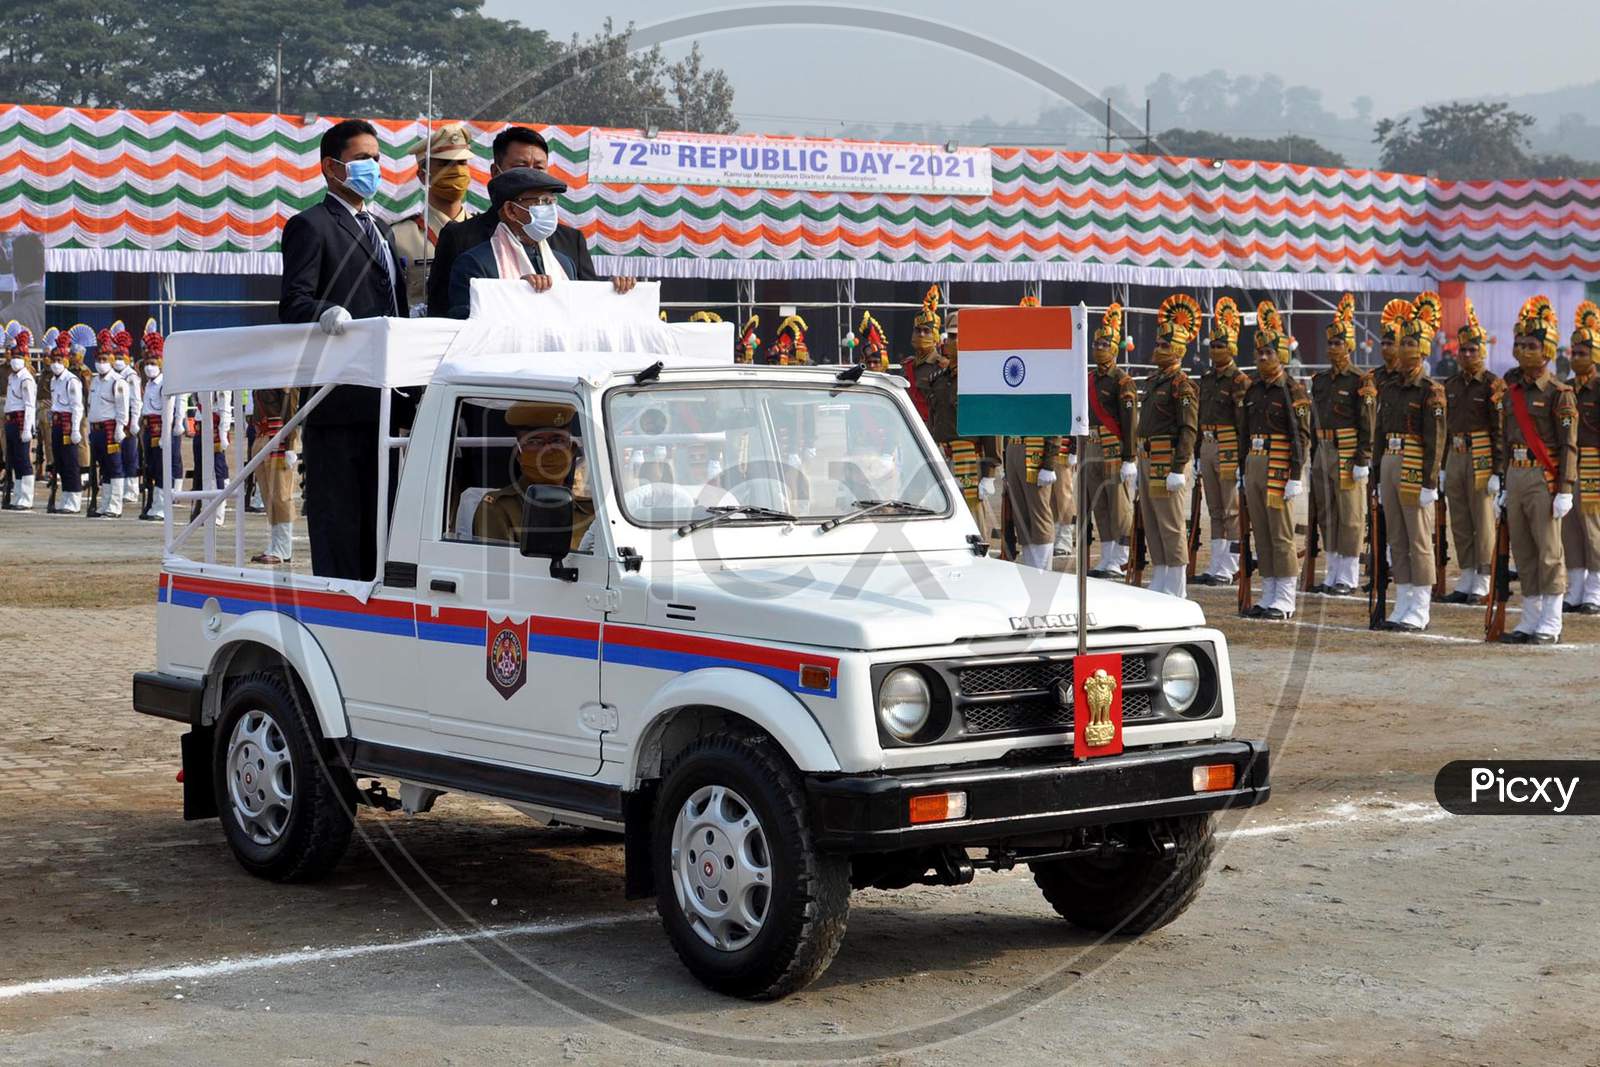 Governor of Assam Professor Jagdish  Mukhi inspects the guard of honour on the occasion of the Republic Day at Veterinary ground in Guwahati  on Jan 26,2021.